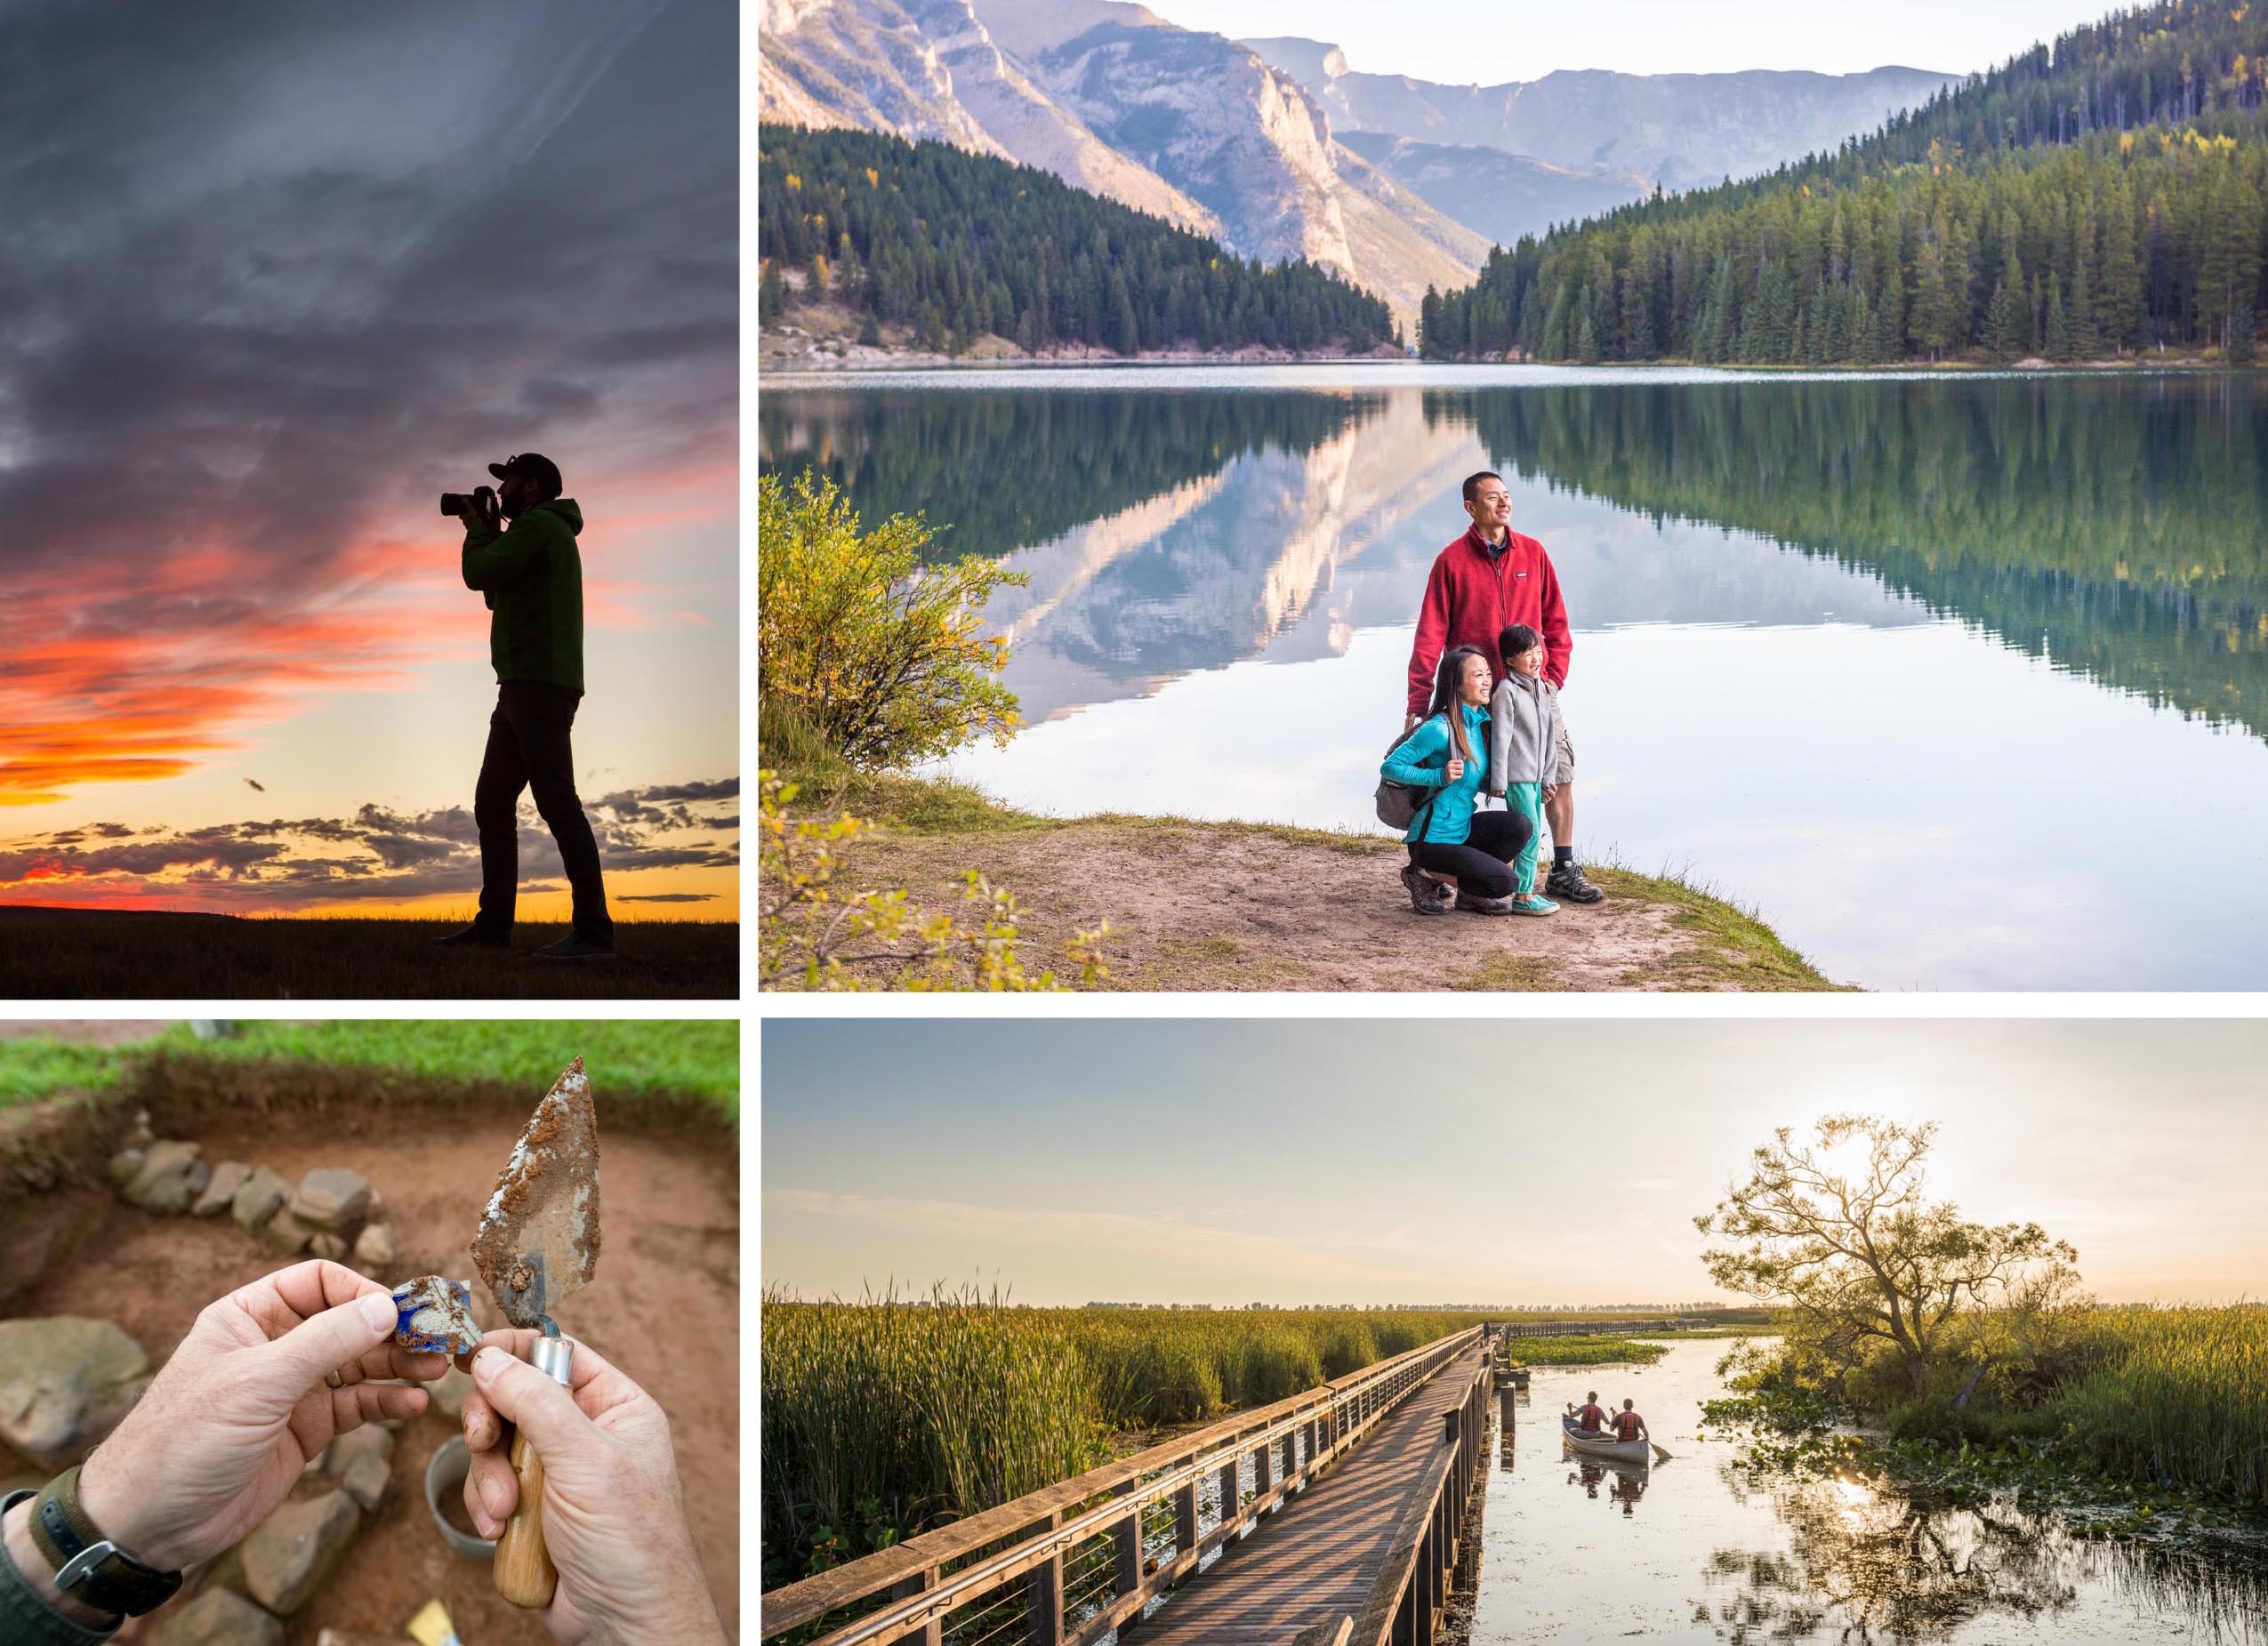 Four images: 1. A person using a camera at sunset, 2. A family on the shore of a mountain lake, 3. An archaeological dig, 4. Two people paddling a canoe.